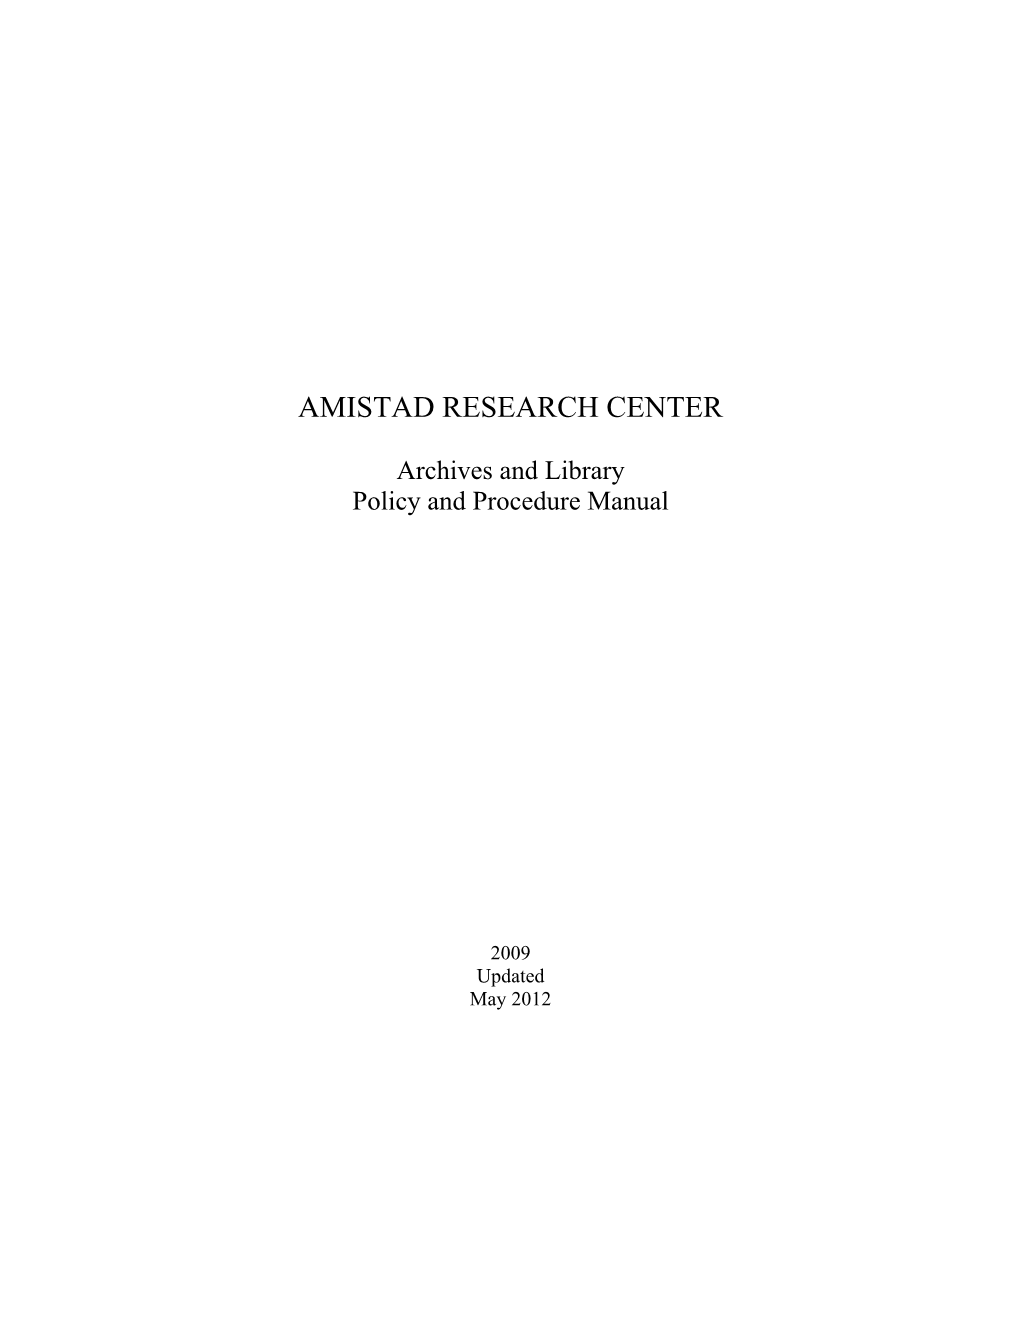 Amistad Research Center